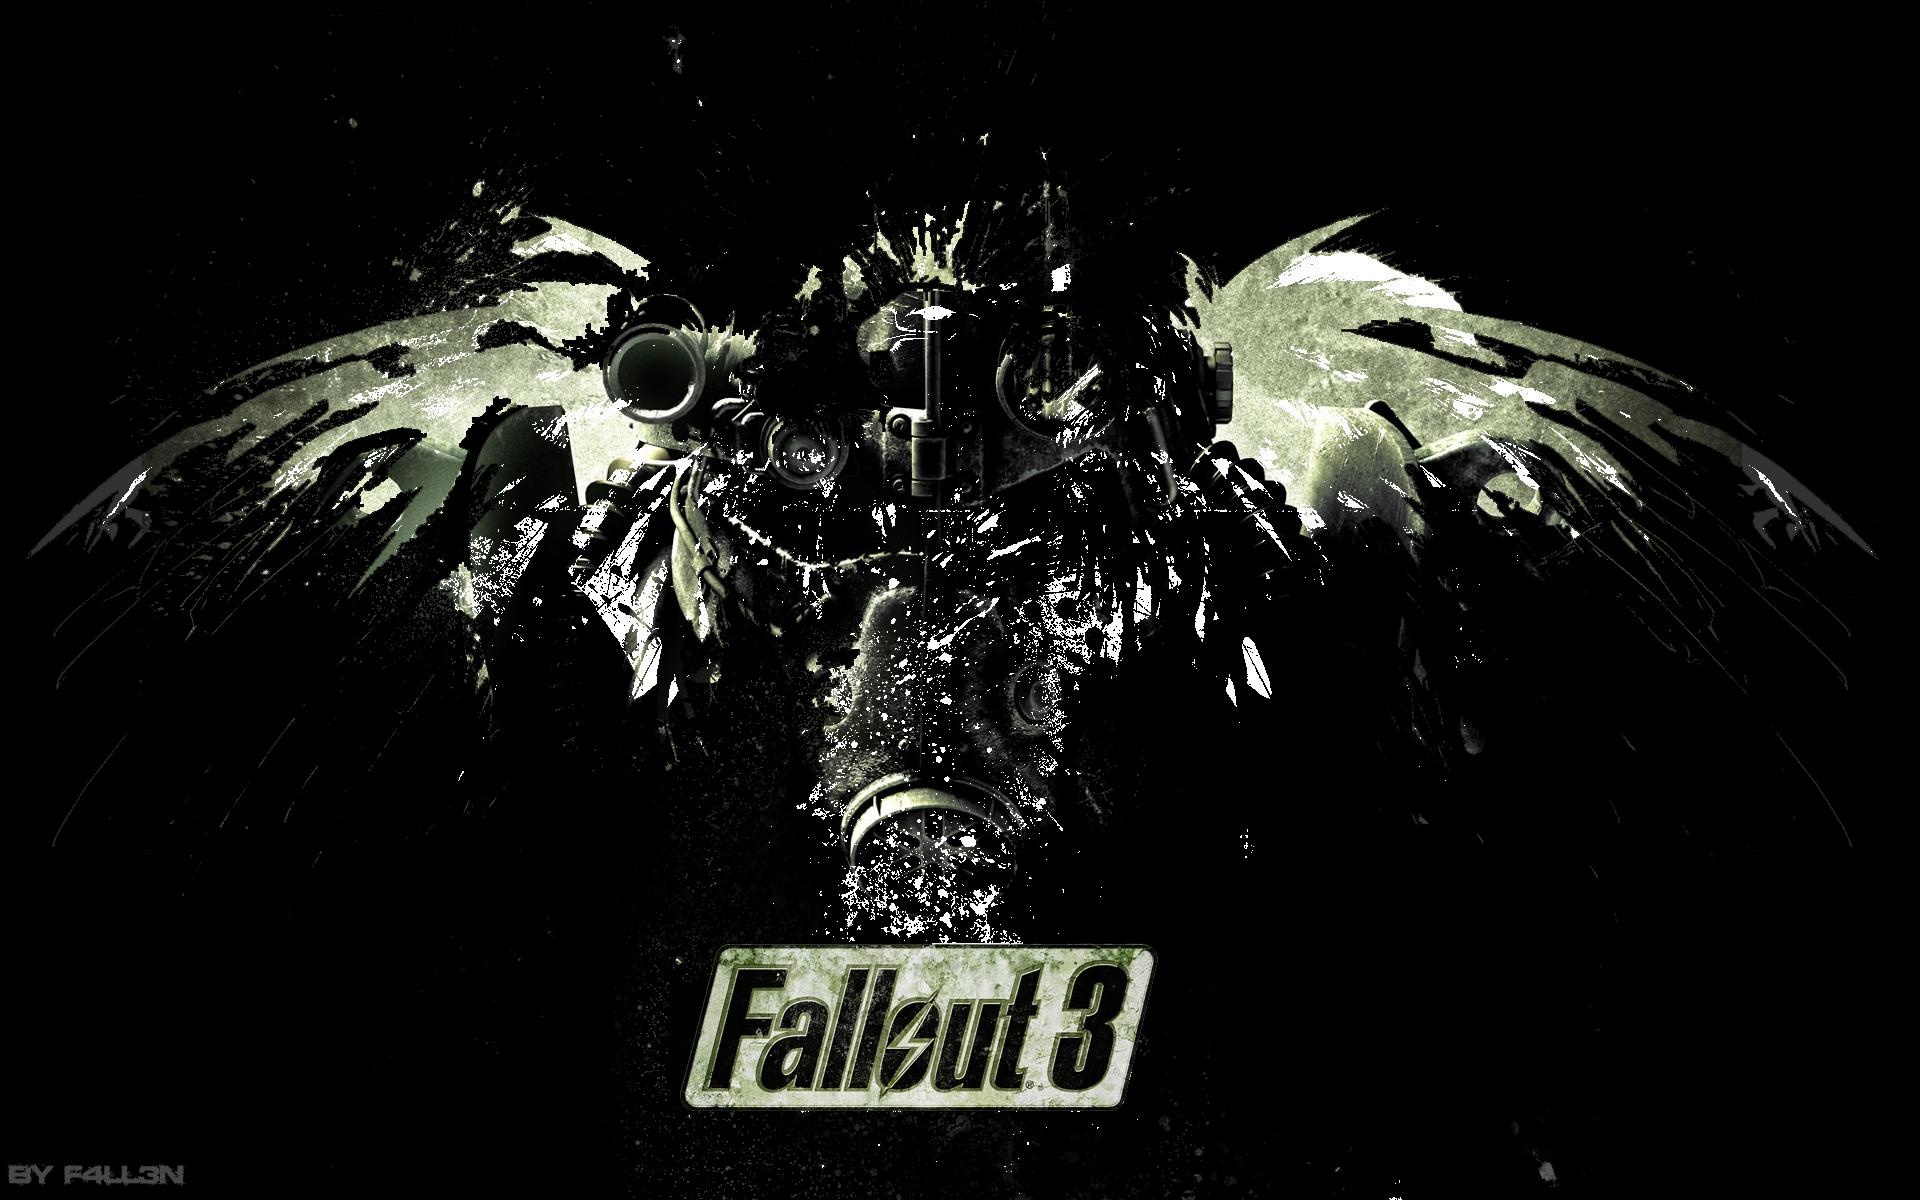 Free Download Download Fallout 3 Desktop Wallpapers For Desktop Mobile And Pc Size 19x10 For Your Desktop Mobile Tablet Explore 47 Fallout Computer Wallpaper Fallout New Vegas Desktop Wallpaper